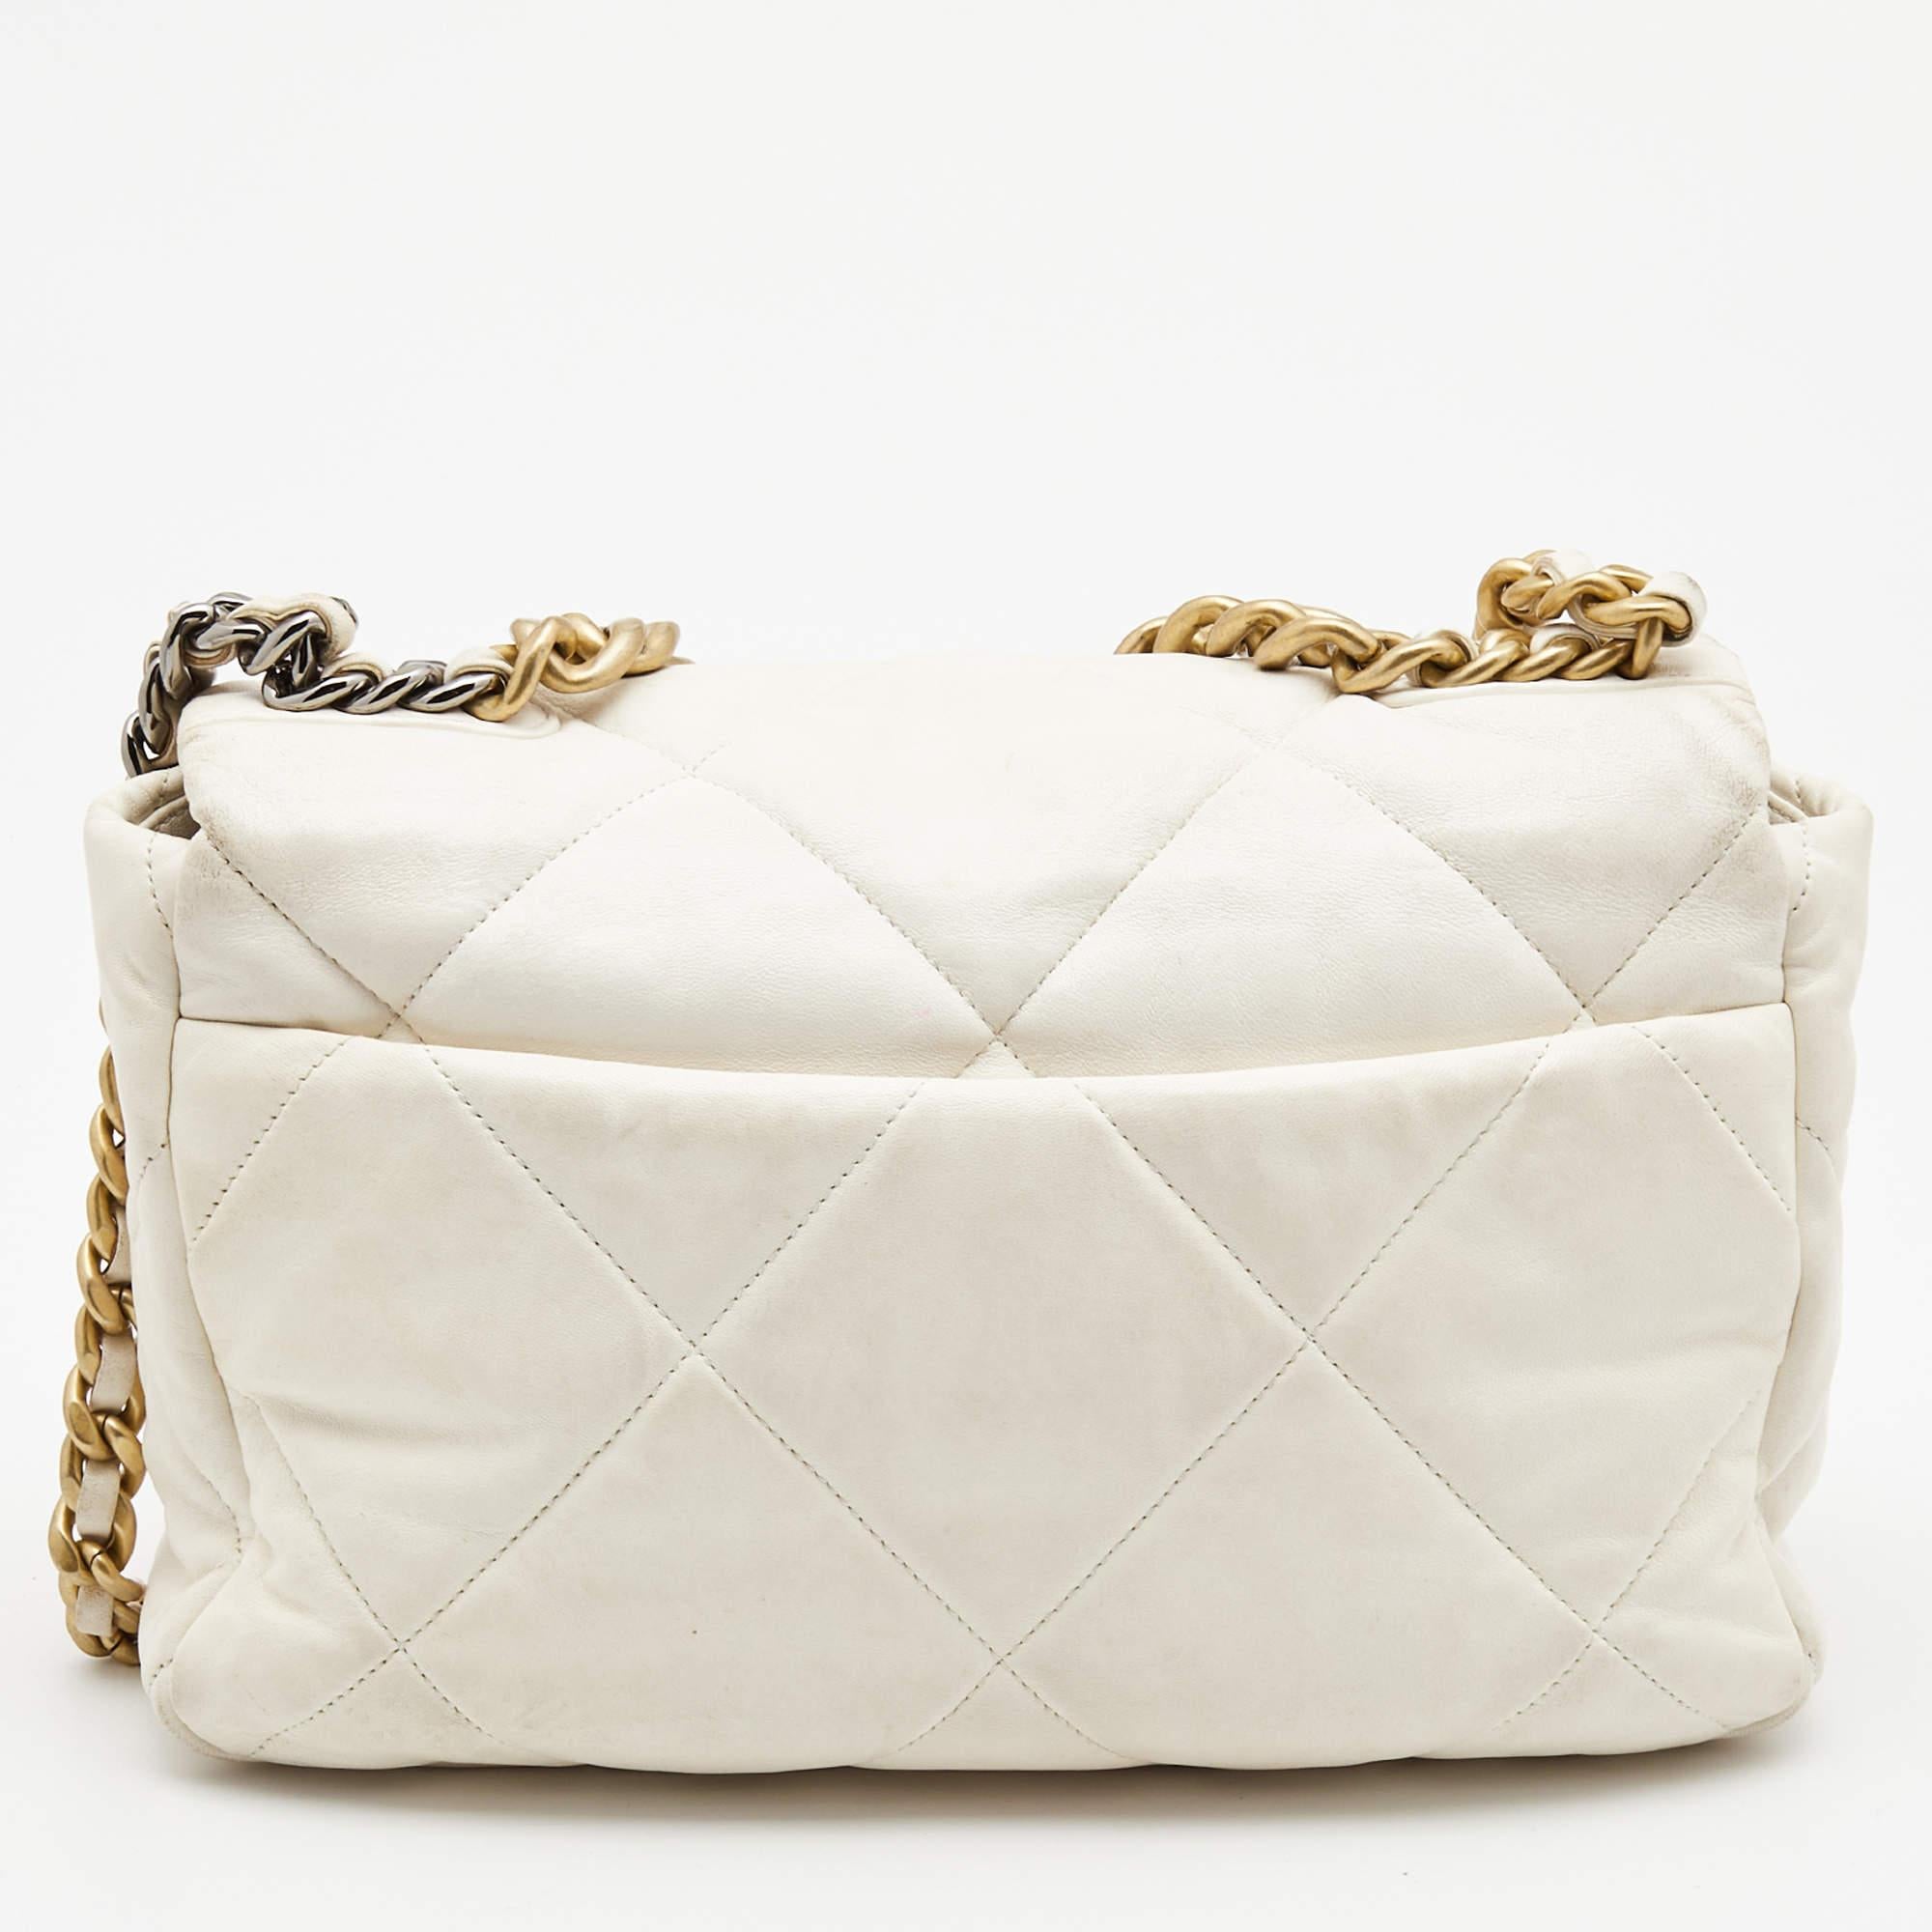 First unveiled in the Chanel Fall 2019 collection, the Chanel 19 bag is named after the year of its release, just like the Chanel 2.55. In design, the bag has exaggerated quilting and hardware in two tones. This version in off-white is made from